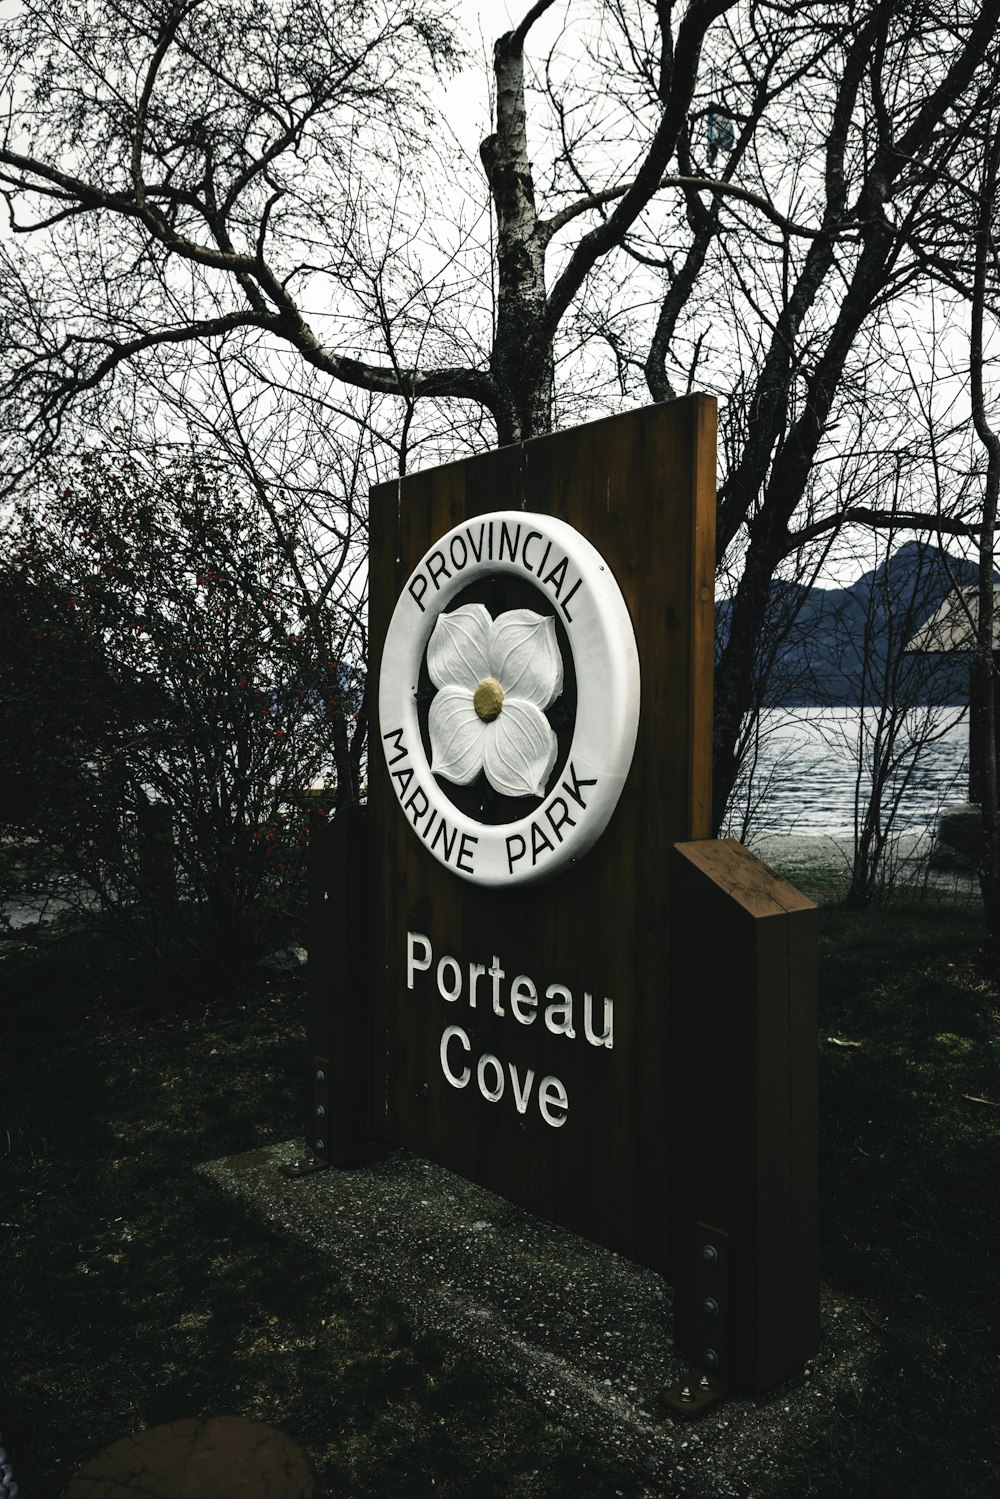 a sign for portreau cove in front of a tree